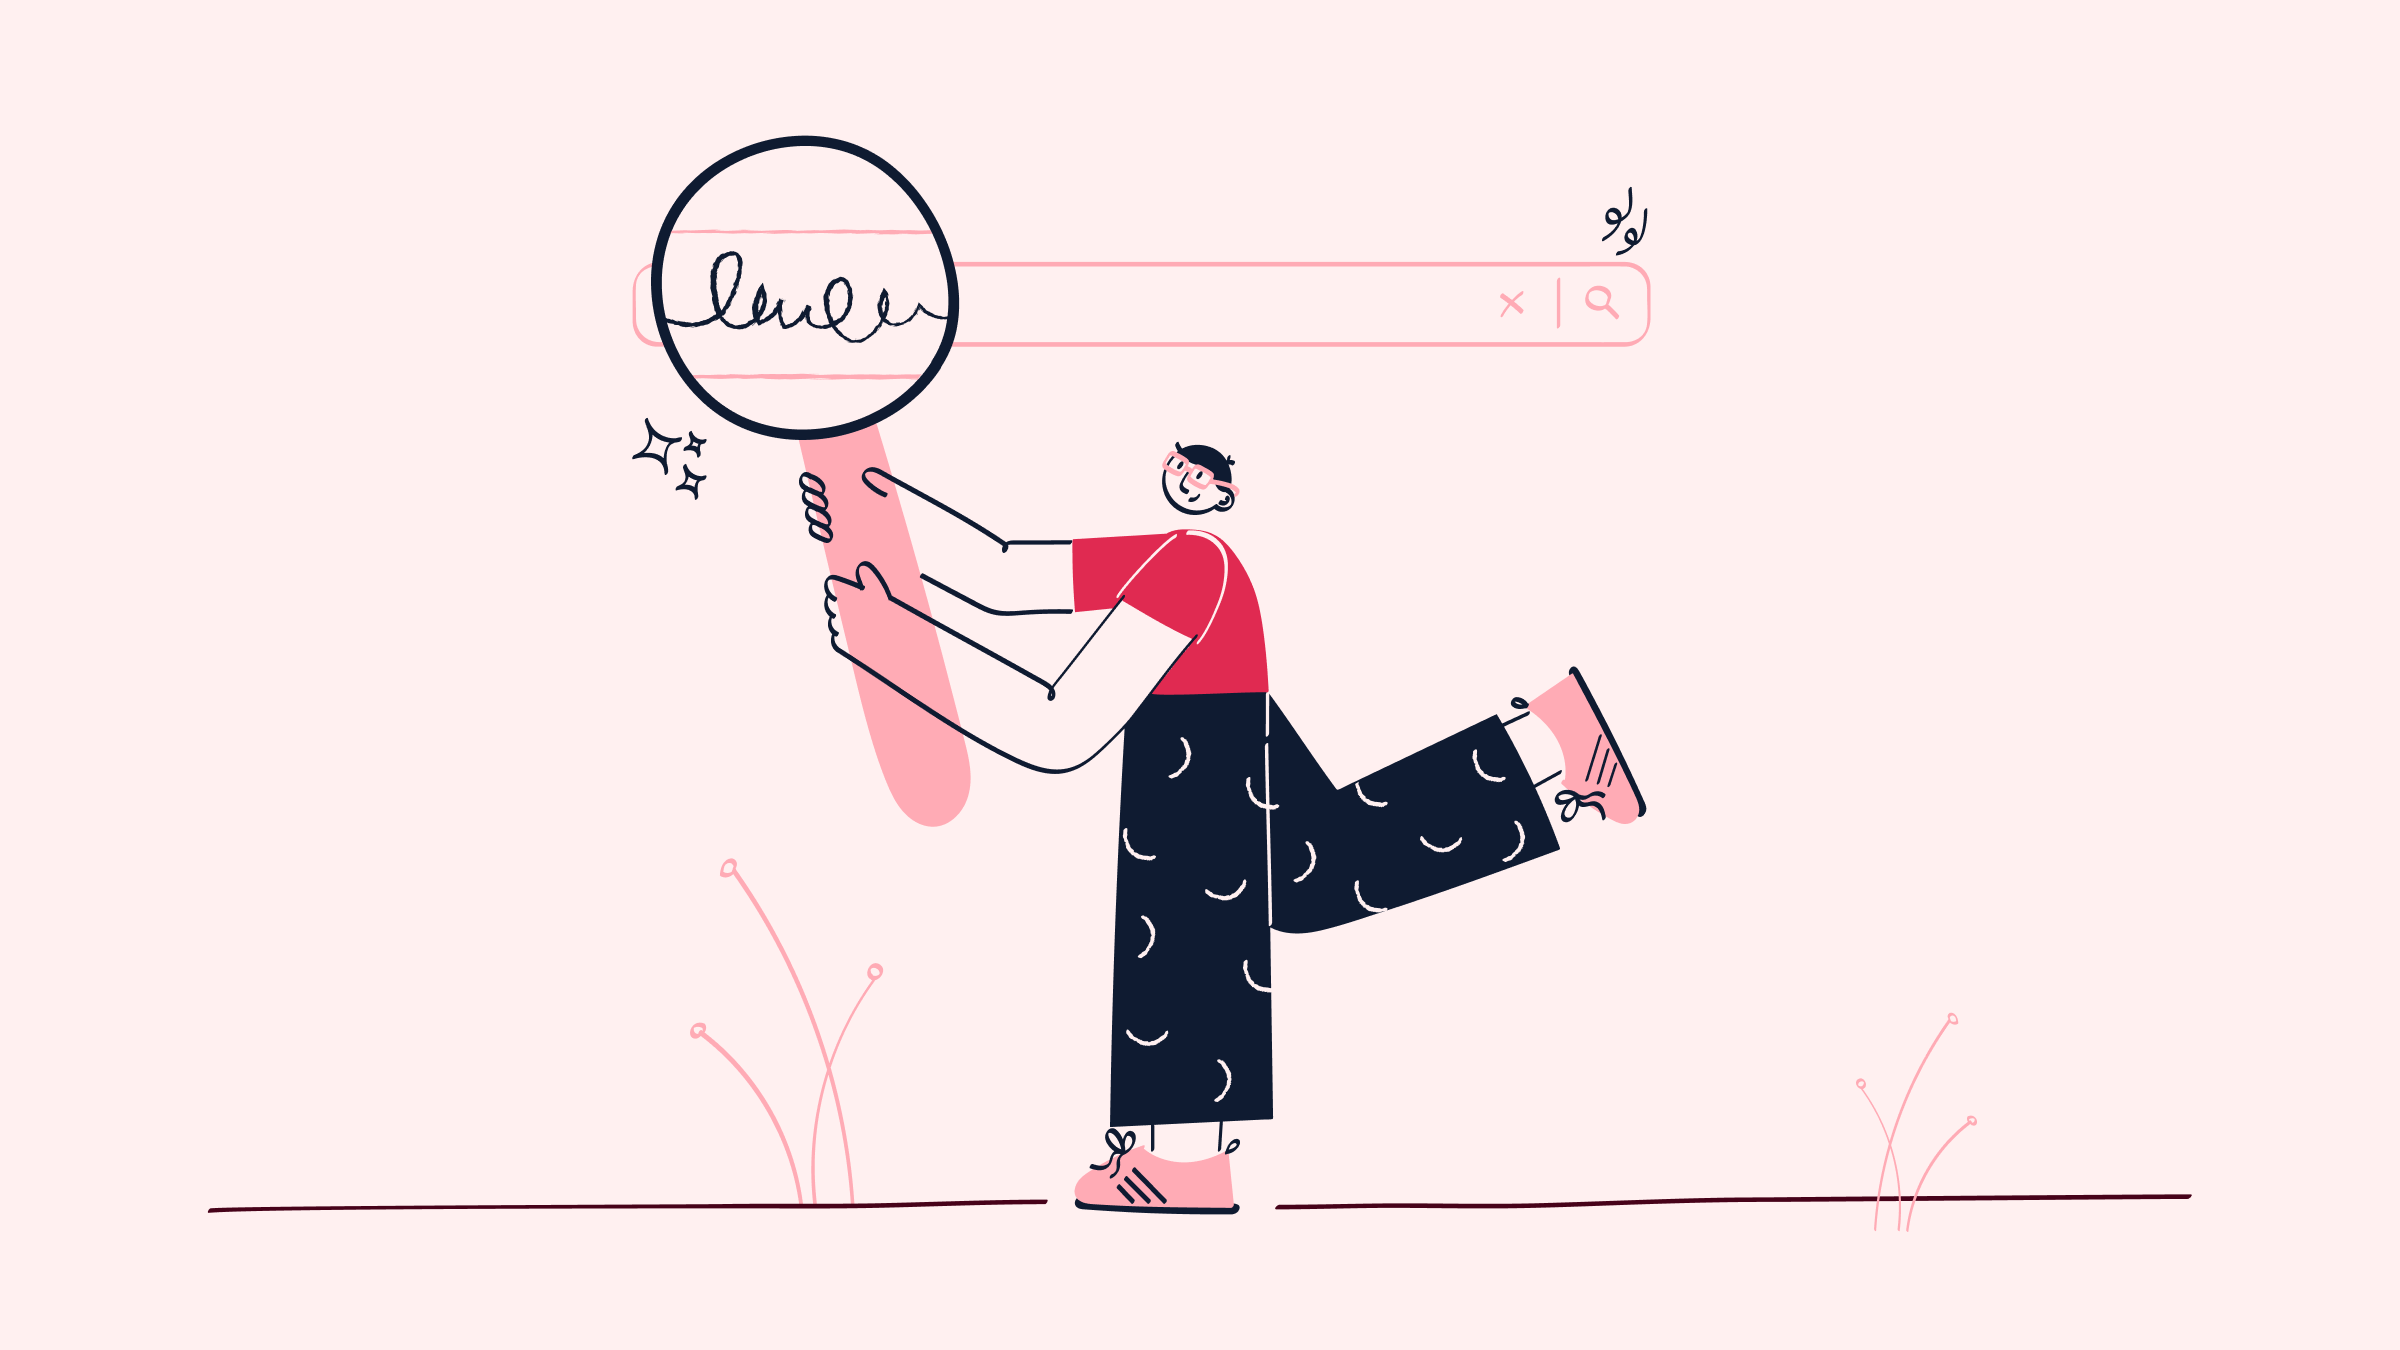 A fuchsia drawing of someone magnifying a search bar.